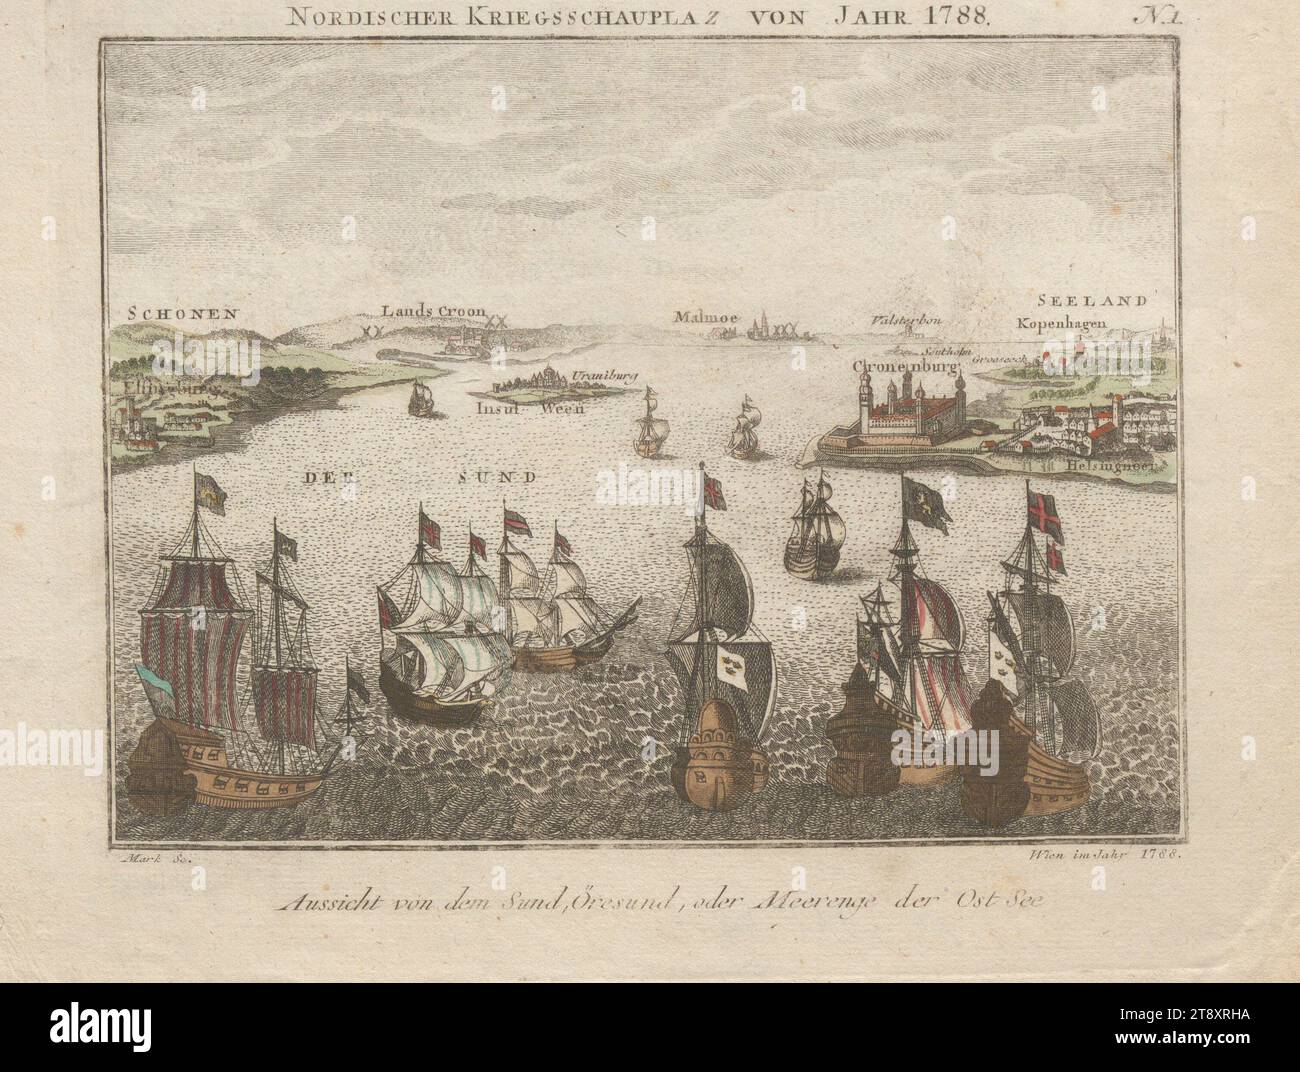 No. 1 of the series 'Nordic Theater of War': view from the Oresund in the Baltic Sea, Quirin Mark (1753-1811), engraver, 1788, paper, colored, copperplate engraving, height 17.8 cm, width 22.3 cm, plate size 16.1×19 cm, war and warfare, fine arts, military, the soldier; the soldier's life, sailing ship, sailing boat, sea, navy, ships (general), The Vienna Collection Stock Photo